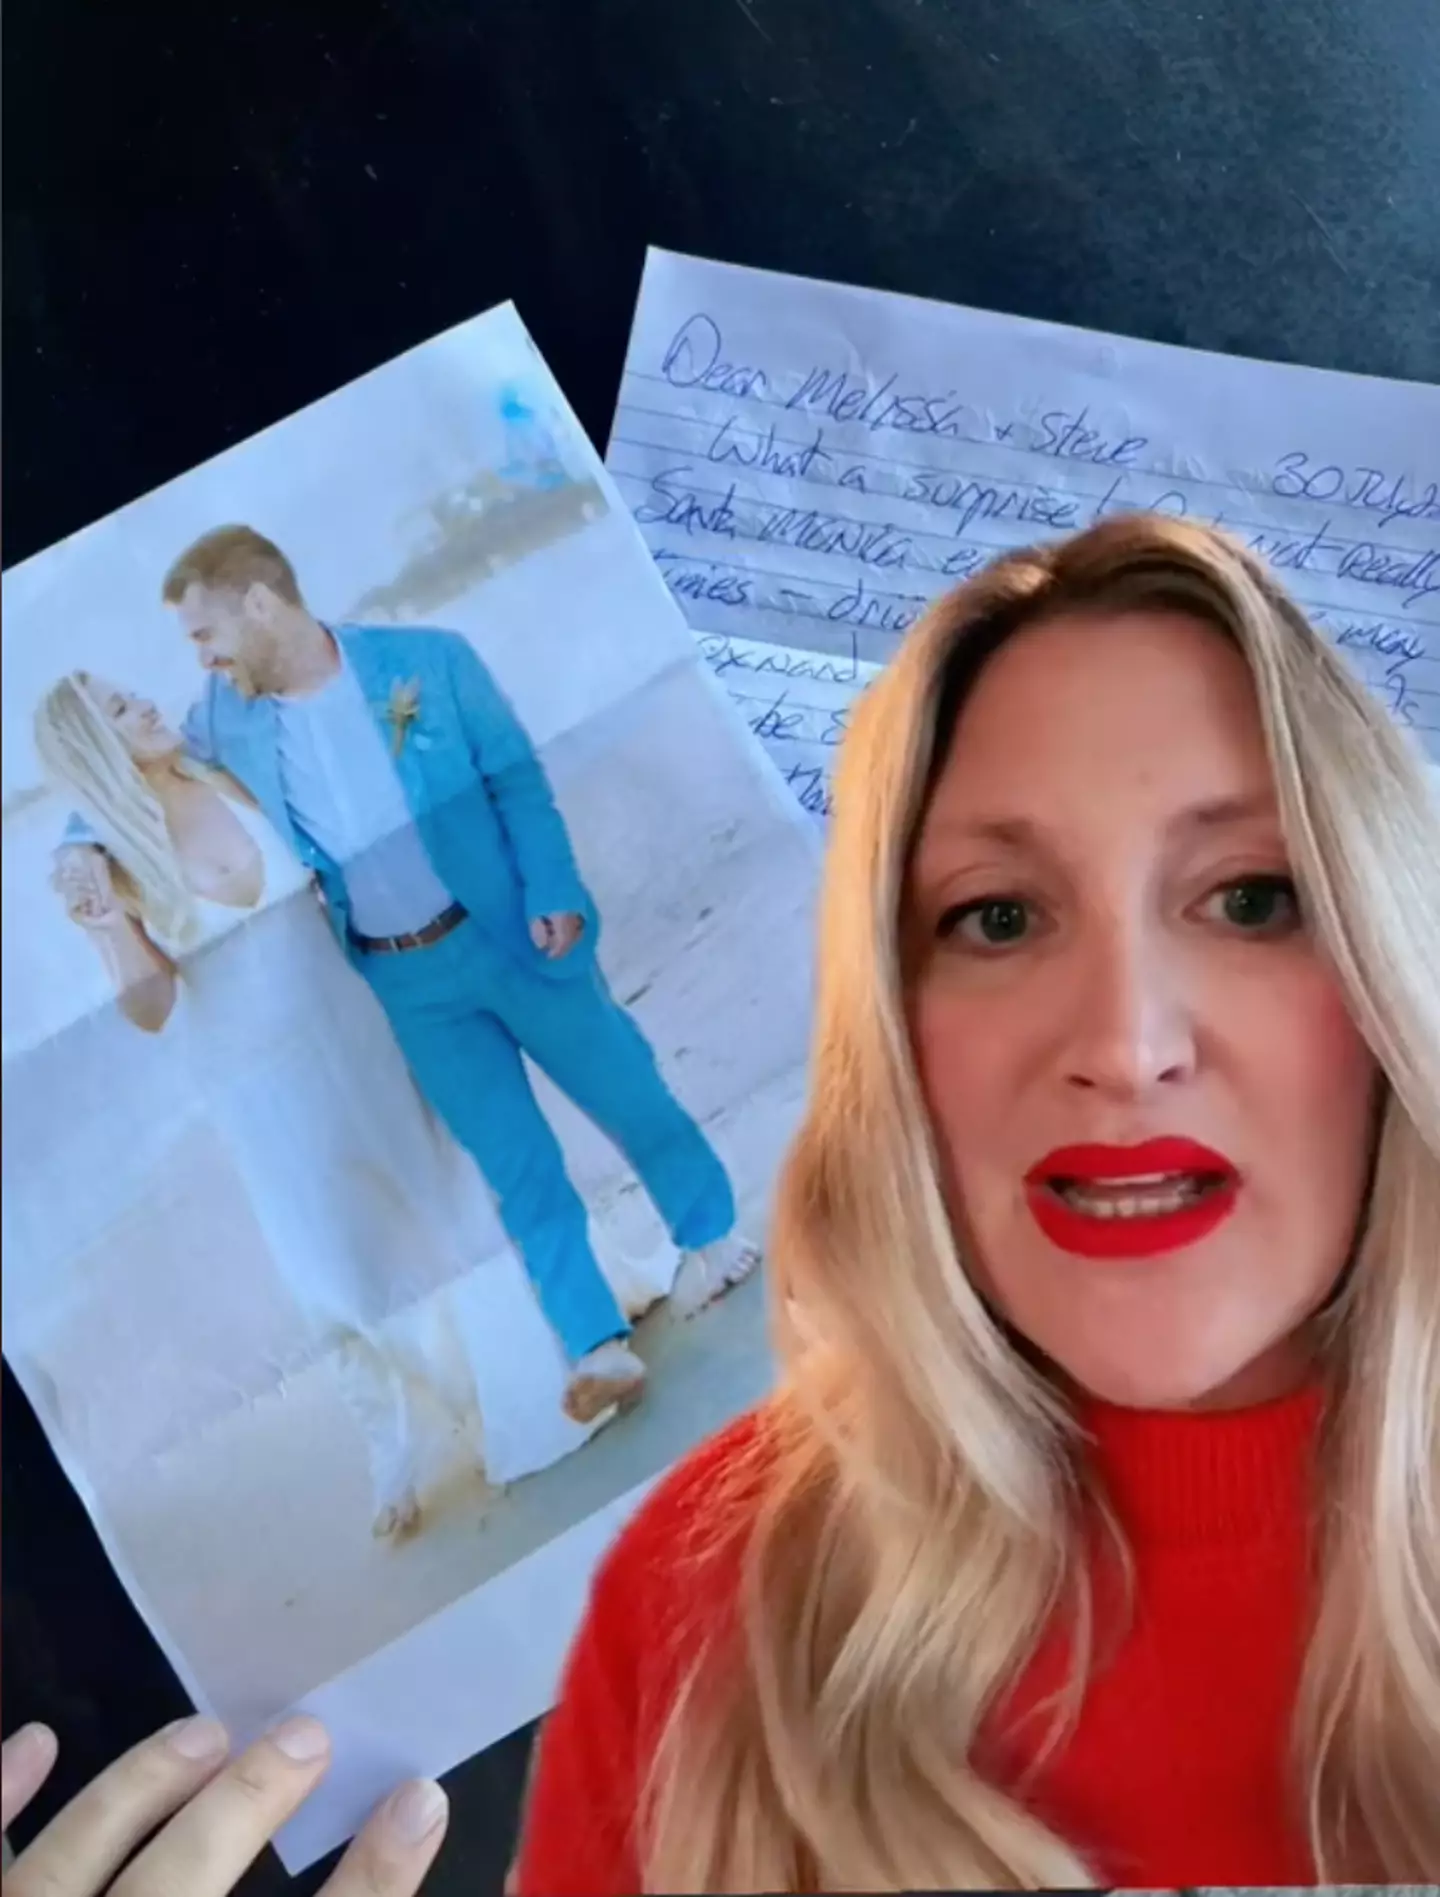 Melissa shared the letter her serial killer father wrote in prison.